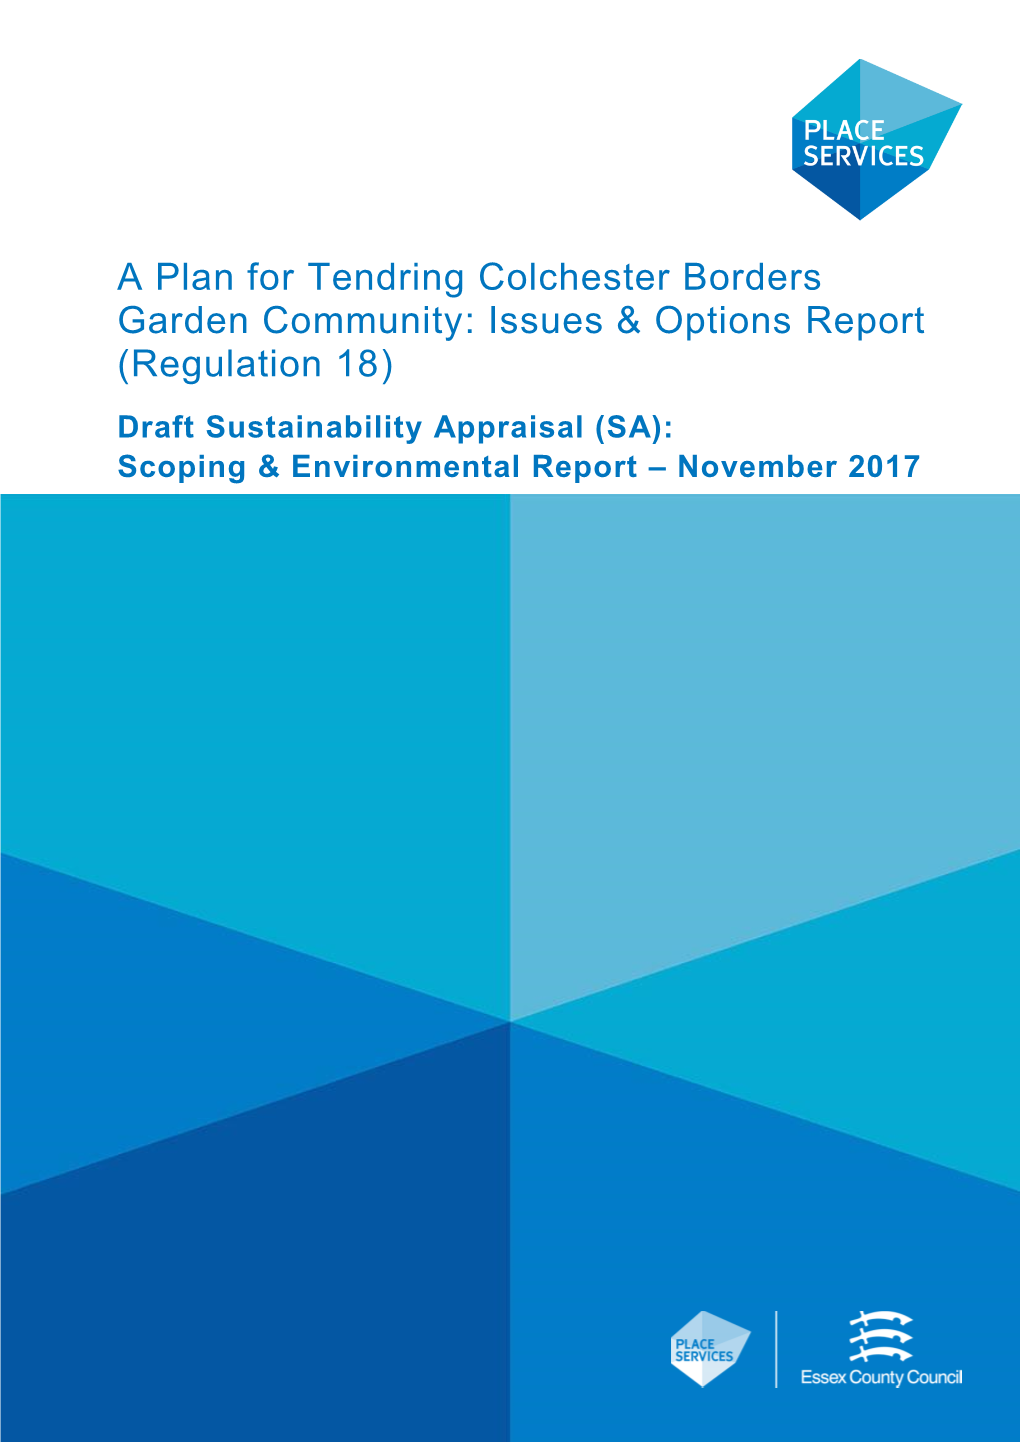 A Plan for Tendring Colchester Borders